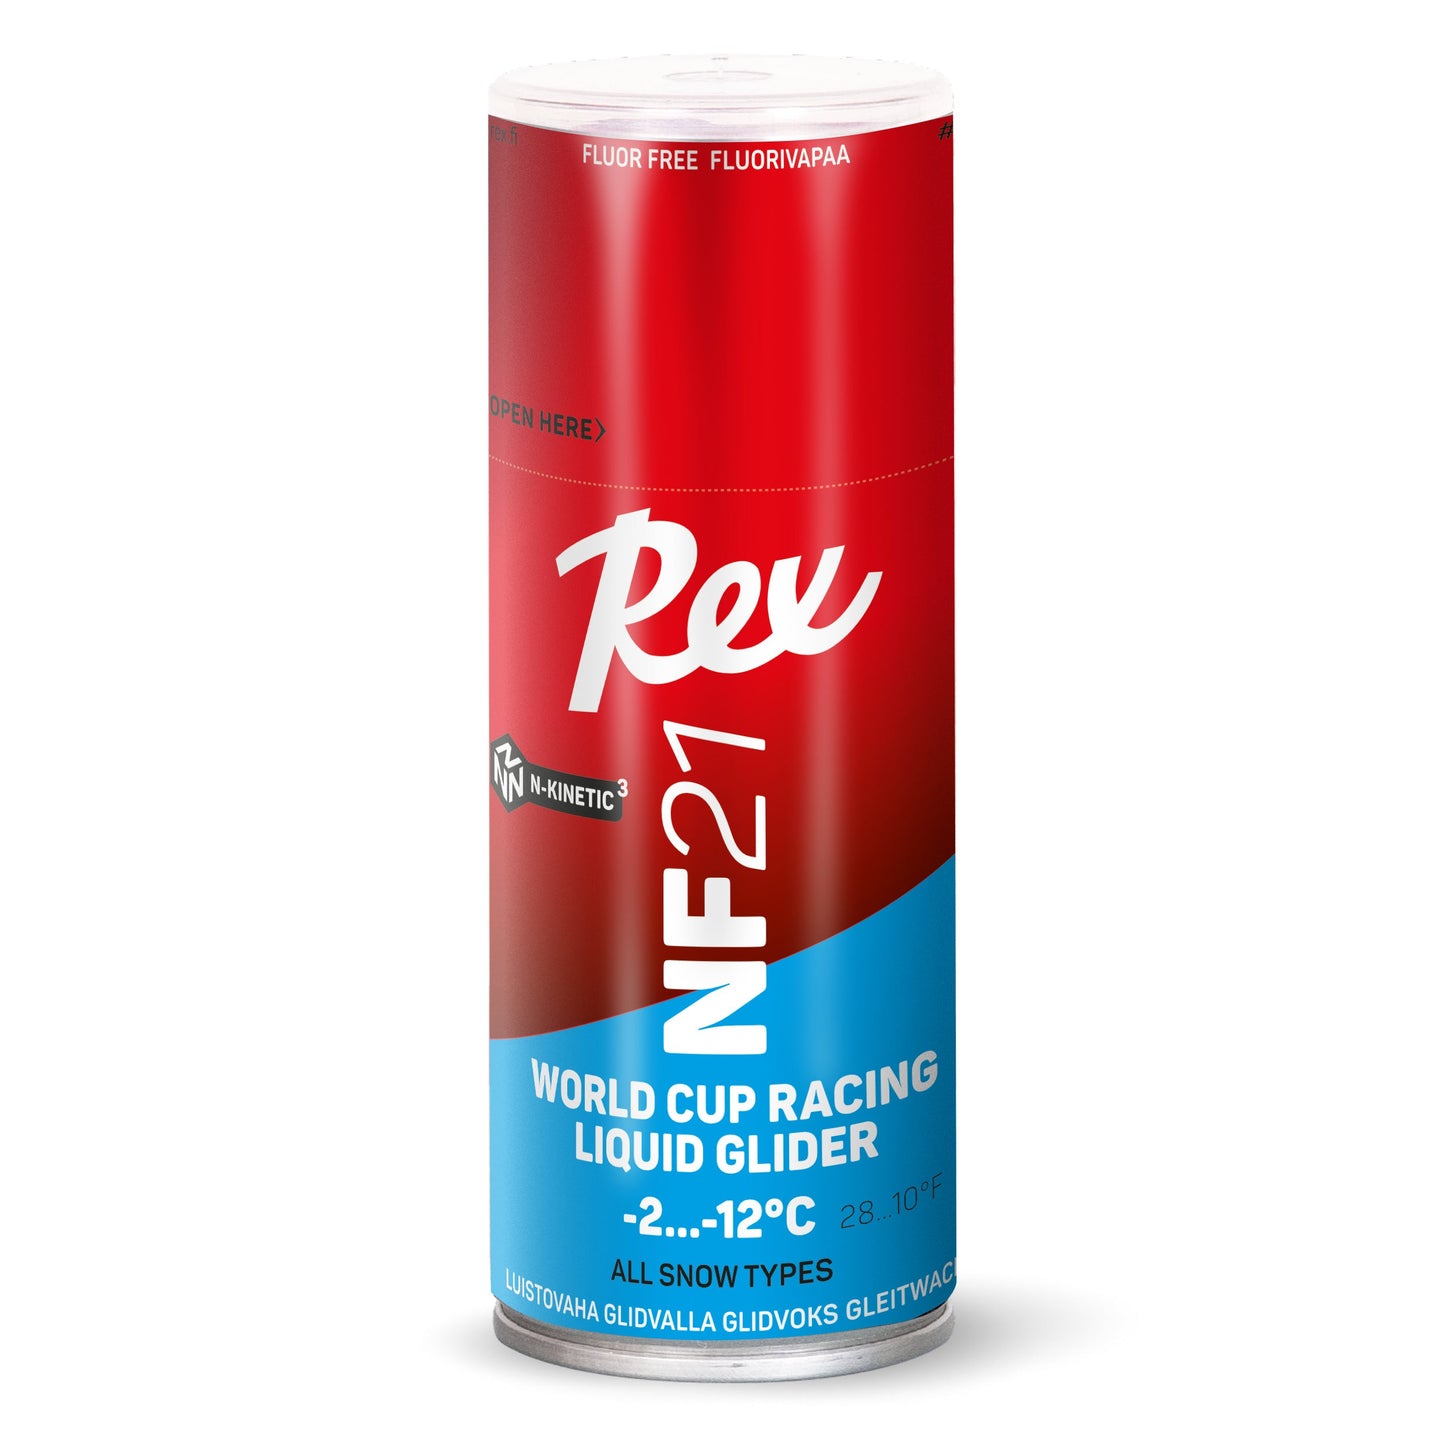 A product picture of the Rex Wax NF21 Blue Liquid Glider